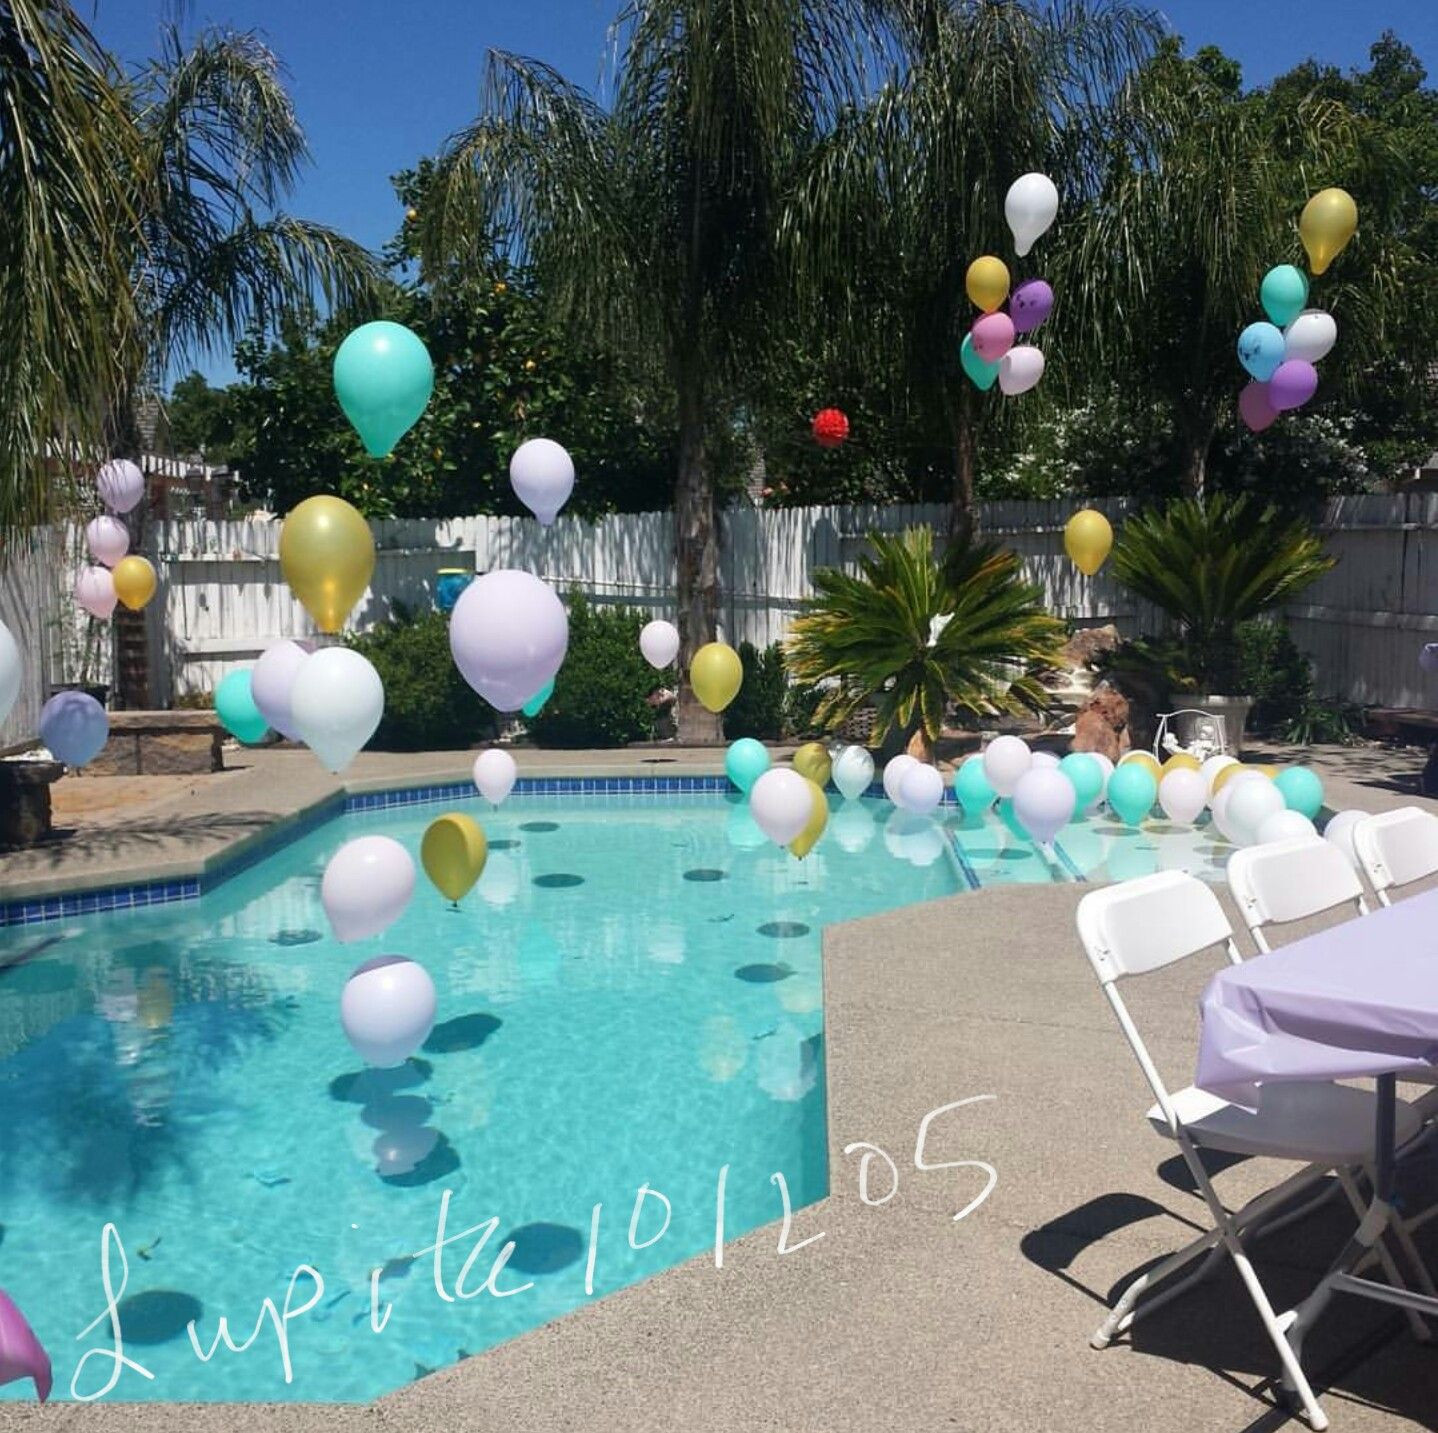 Pool Party Ideas For Sweet 16
 Pool party balloons sweet 16